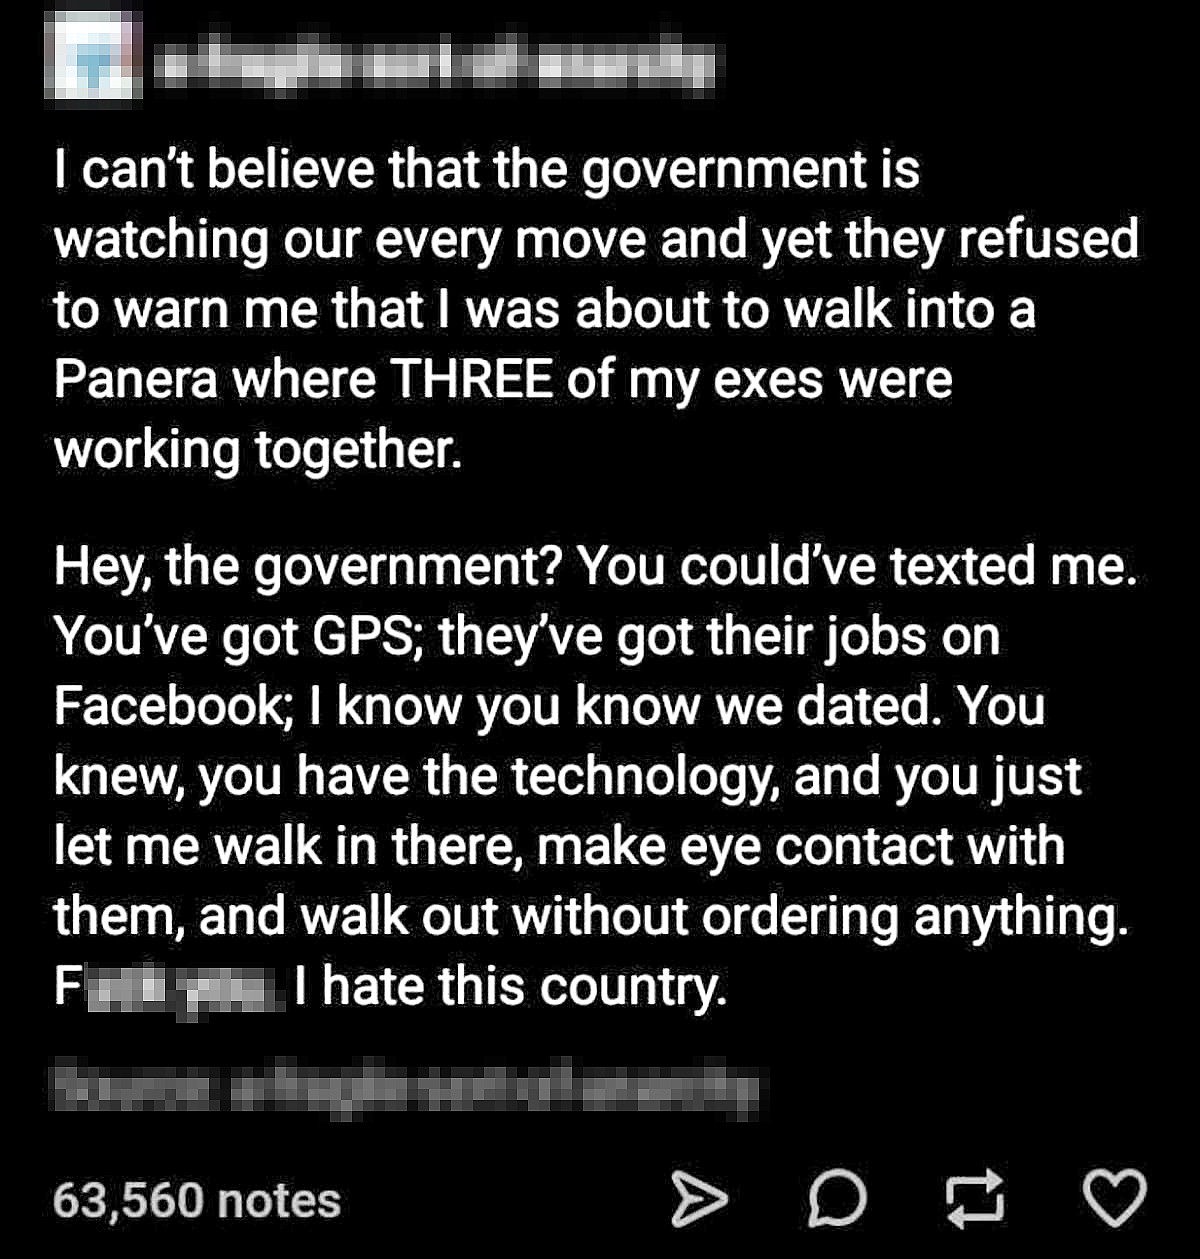 screenshot - I can't believe that the government is watching our every move and yet they refused to warn me that I was about to walk into a Panera where Three of my exes were working together. Hey, the government? You could've texted me. You've got Gps; t